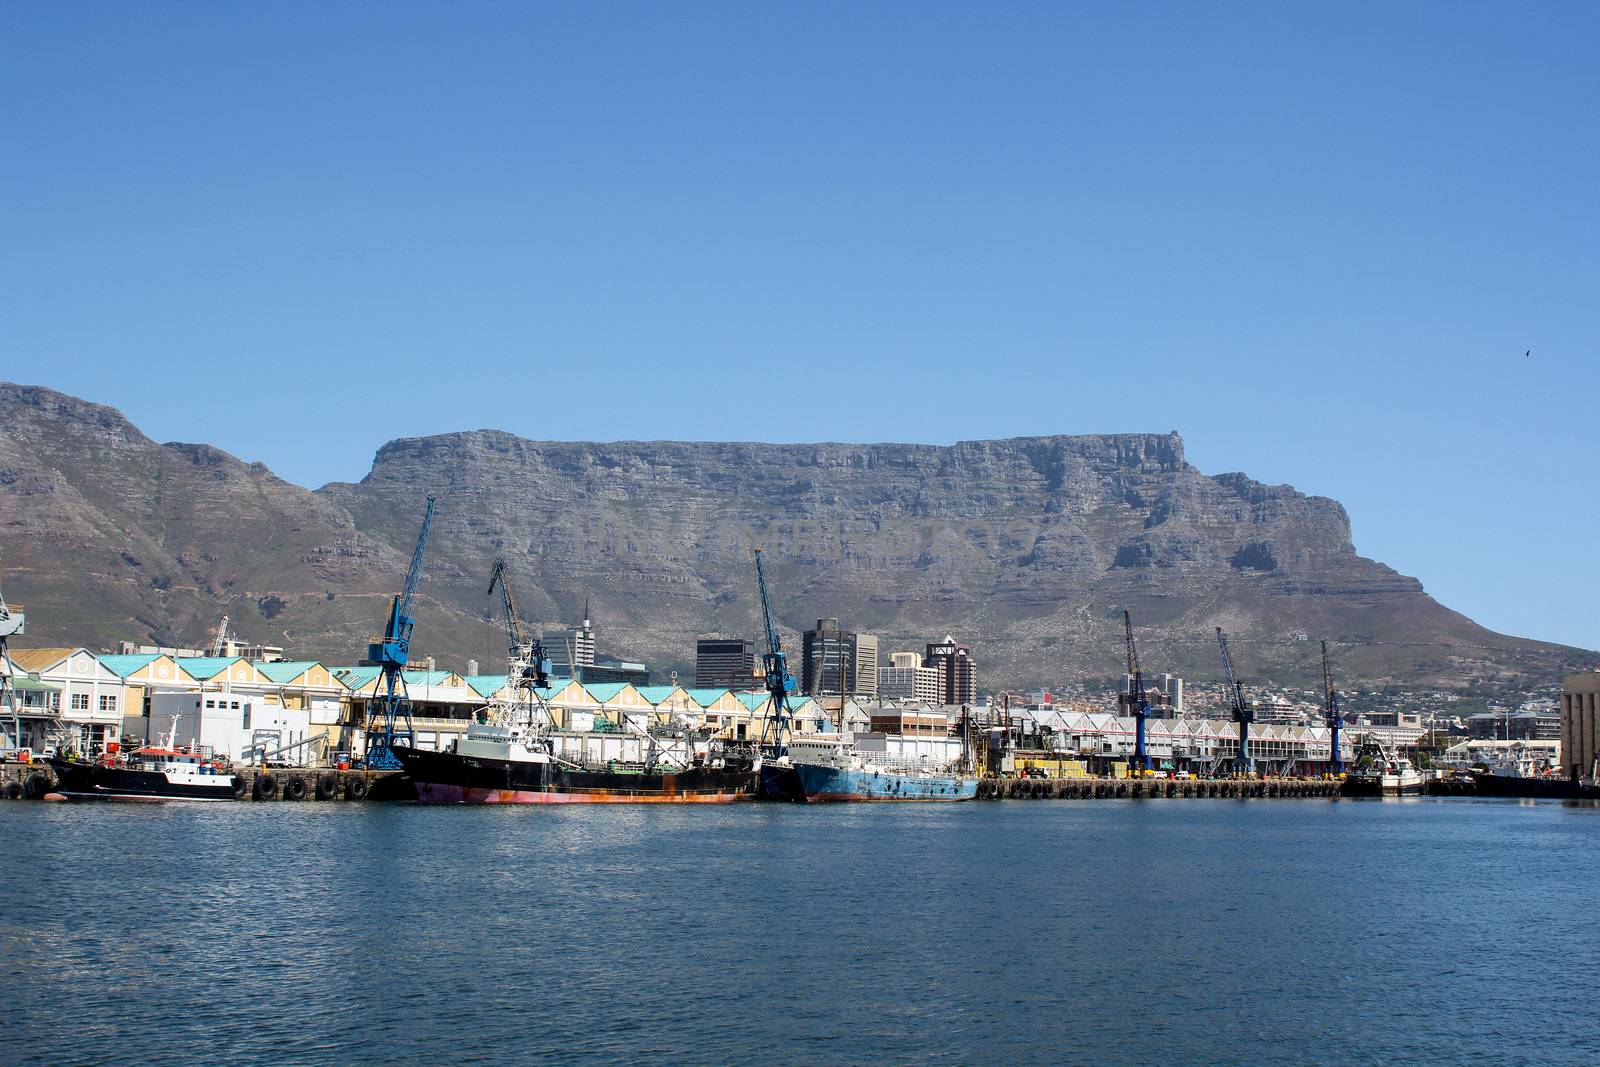 Cape Town Harbor with table mountain